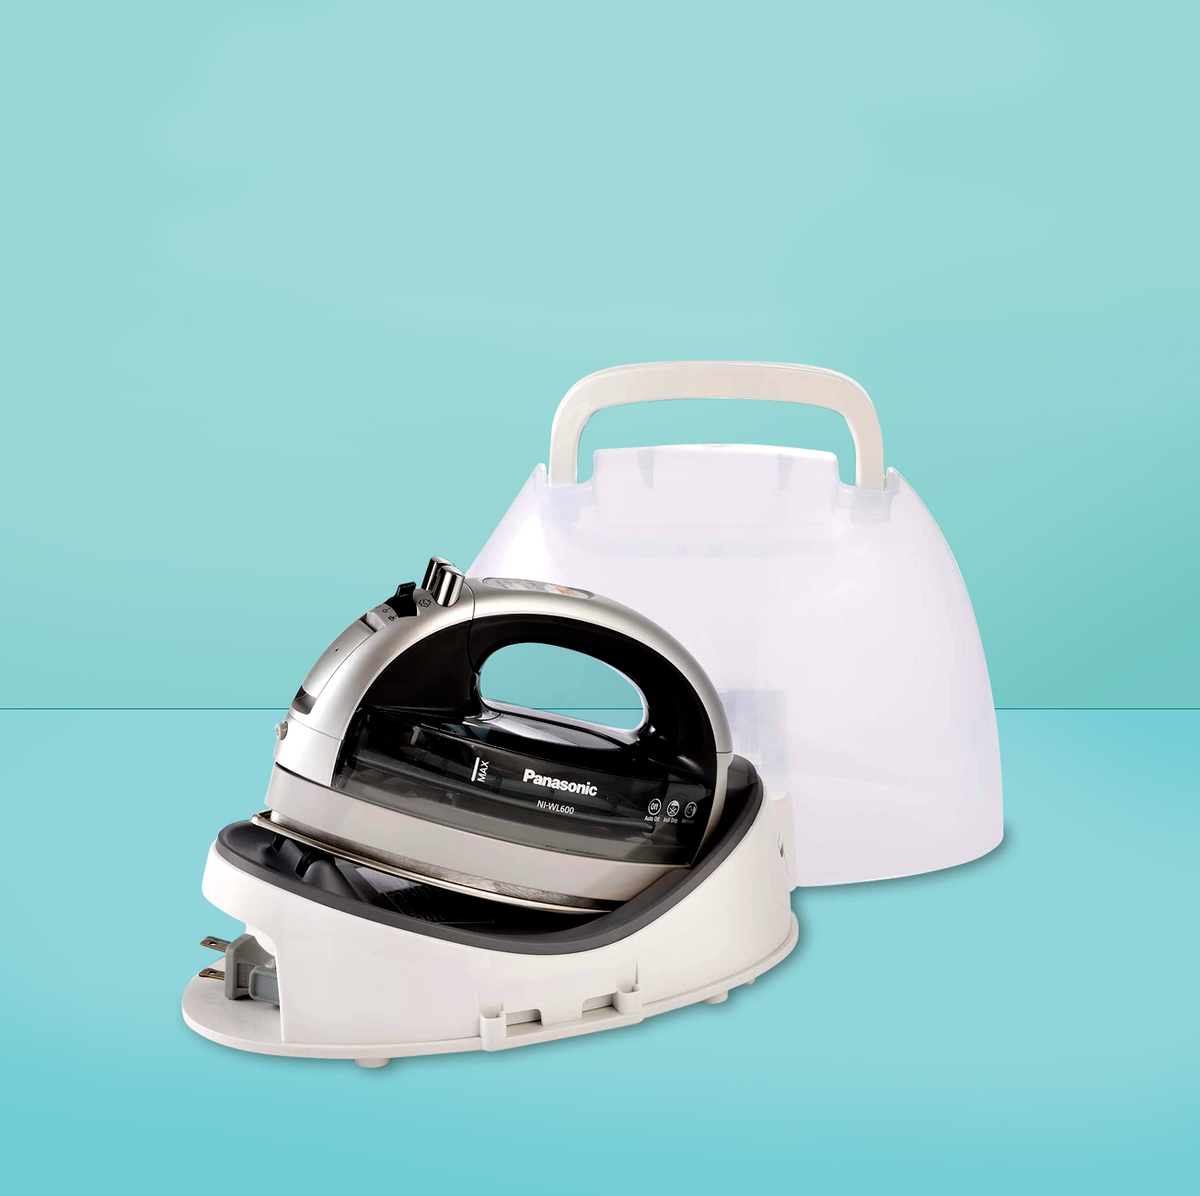 The Best Iron Options, According to a Sewist Who Knows